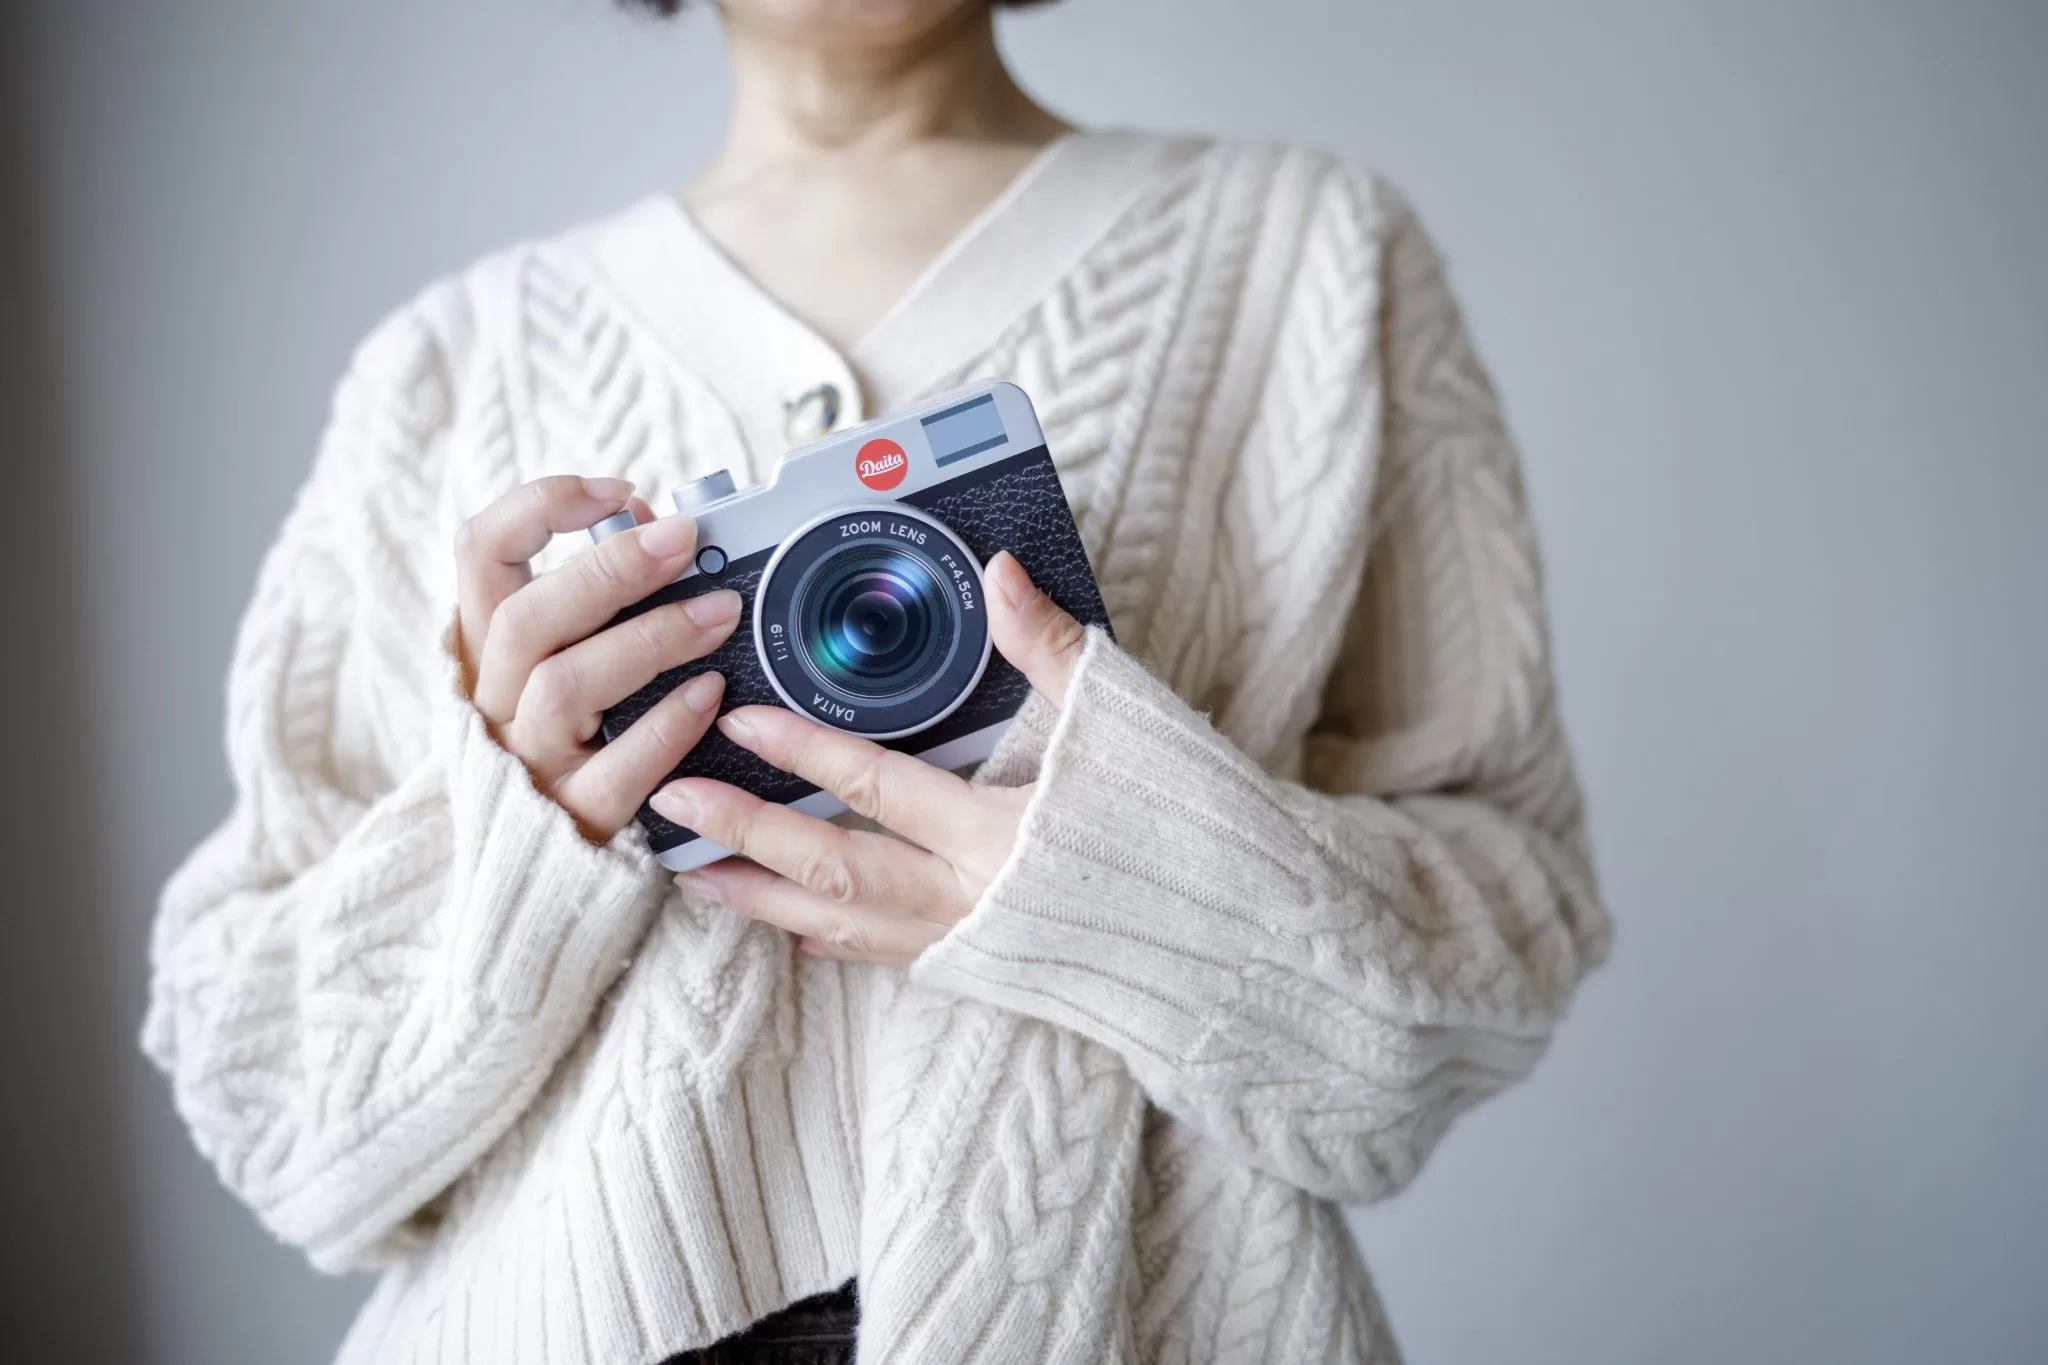 A woman holding Daita camera with two hands in front of her.